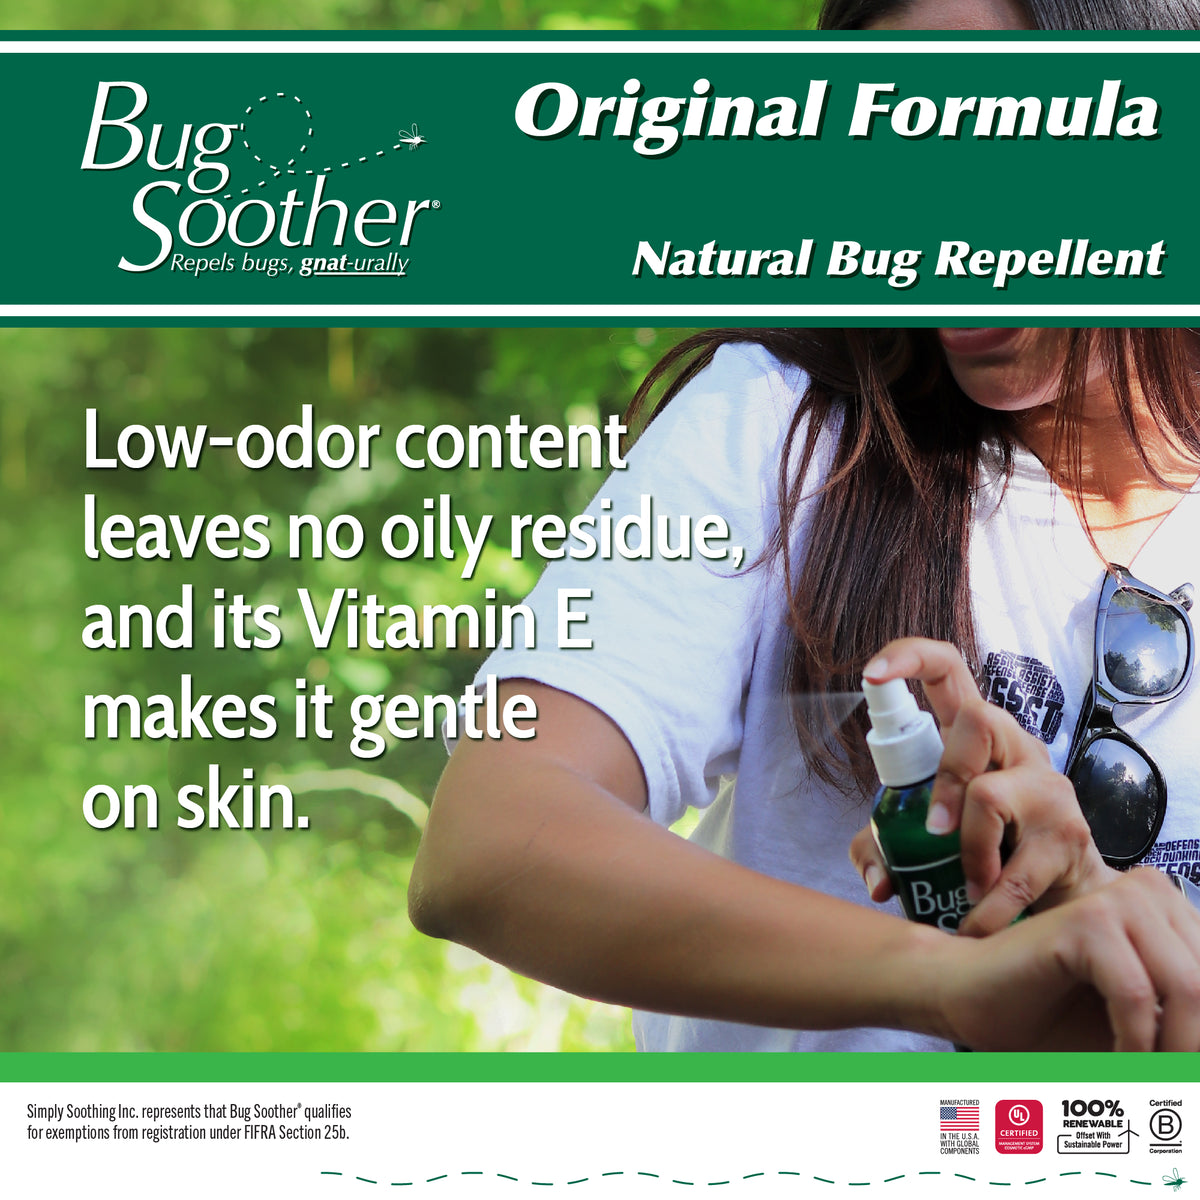 Bug Soother Insect Repellent Spray Packs